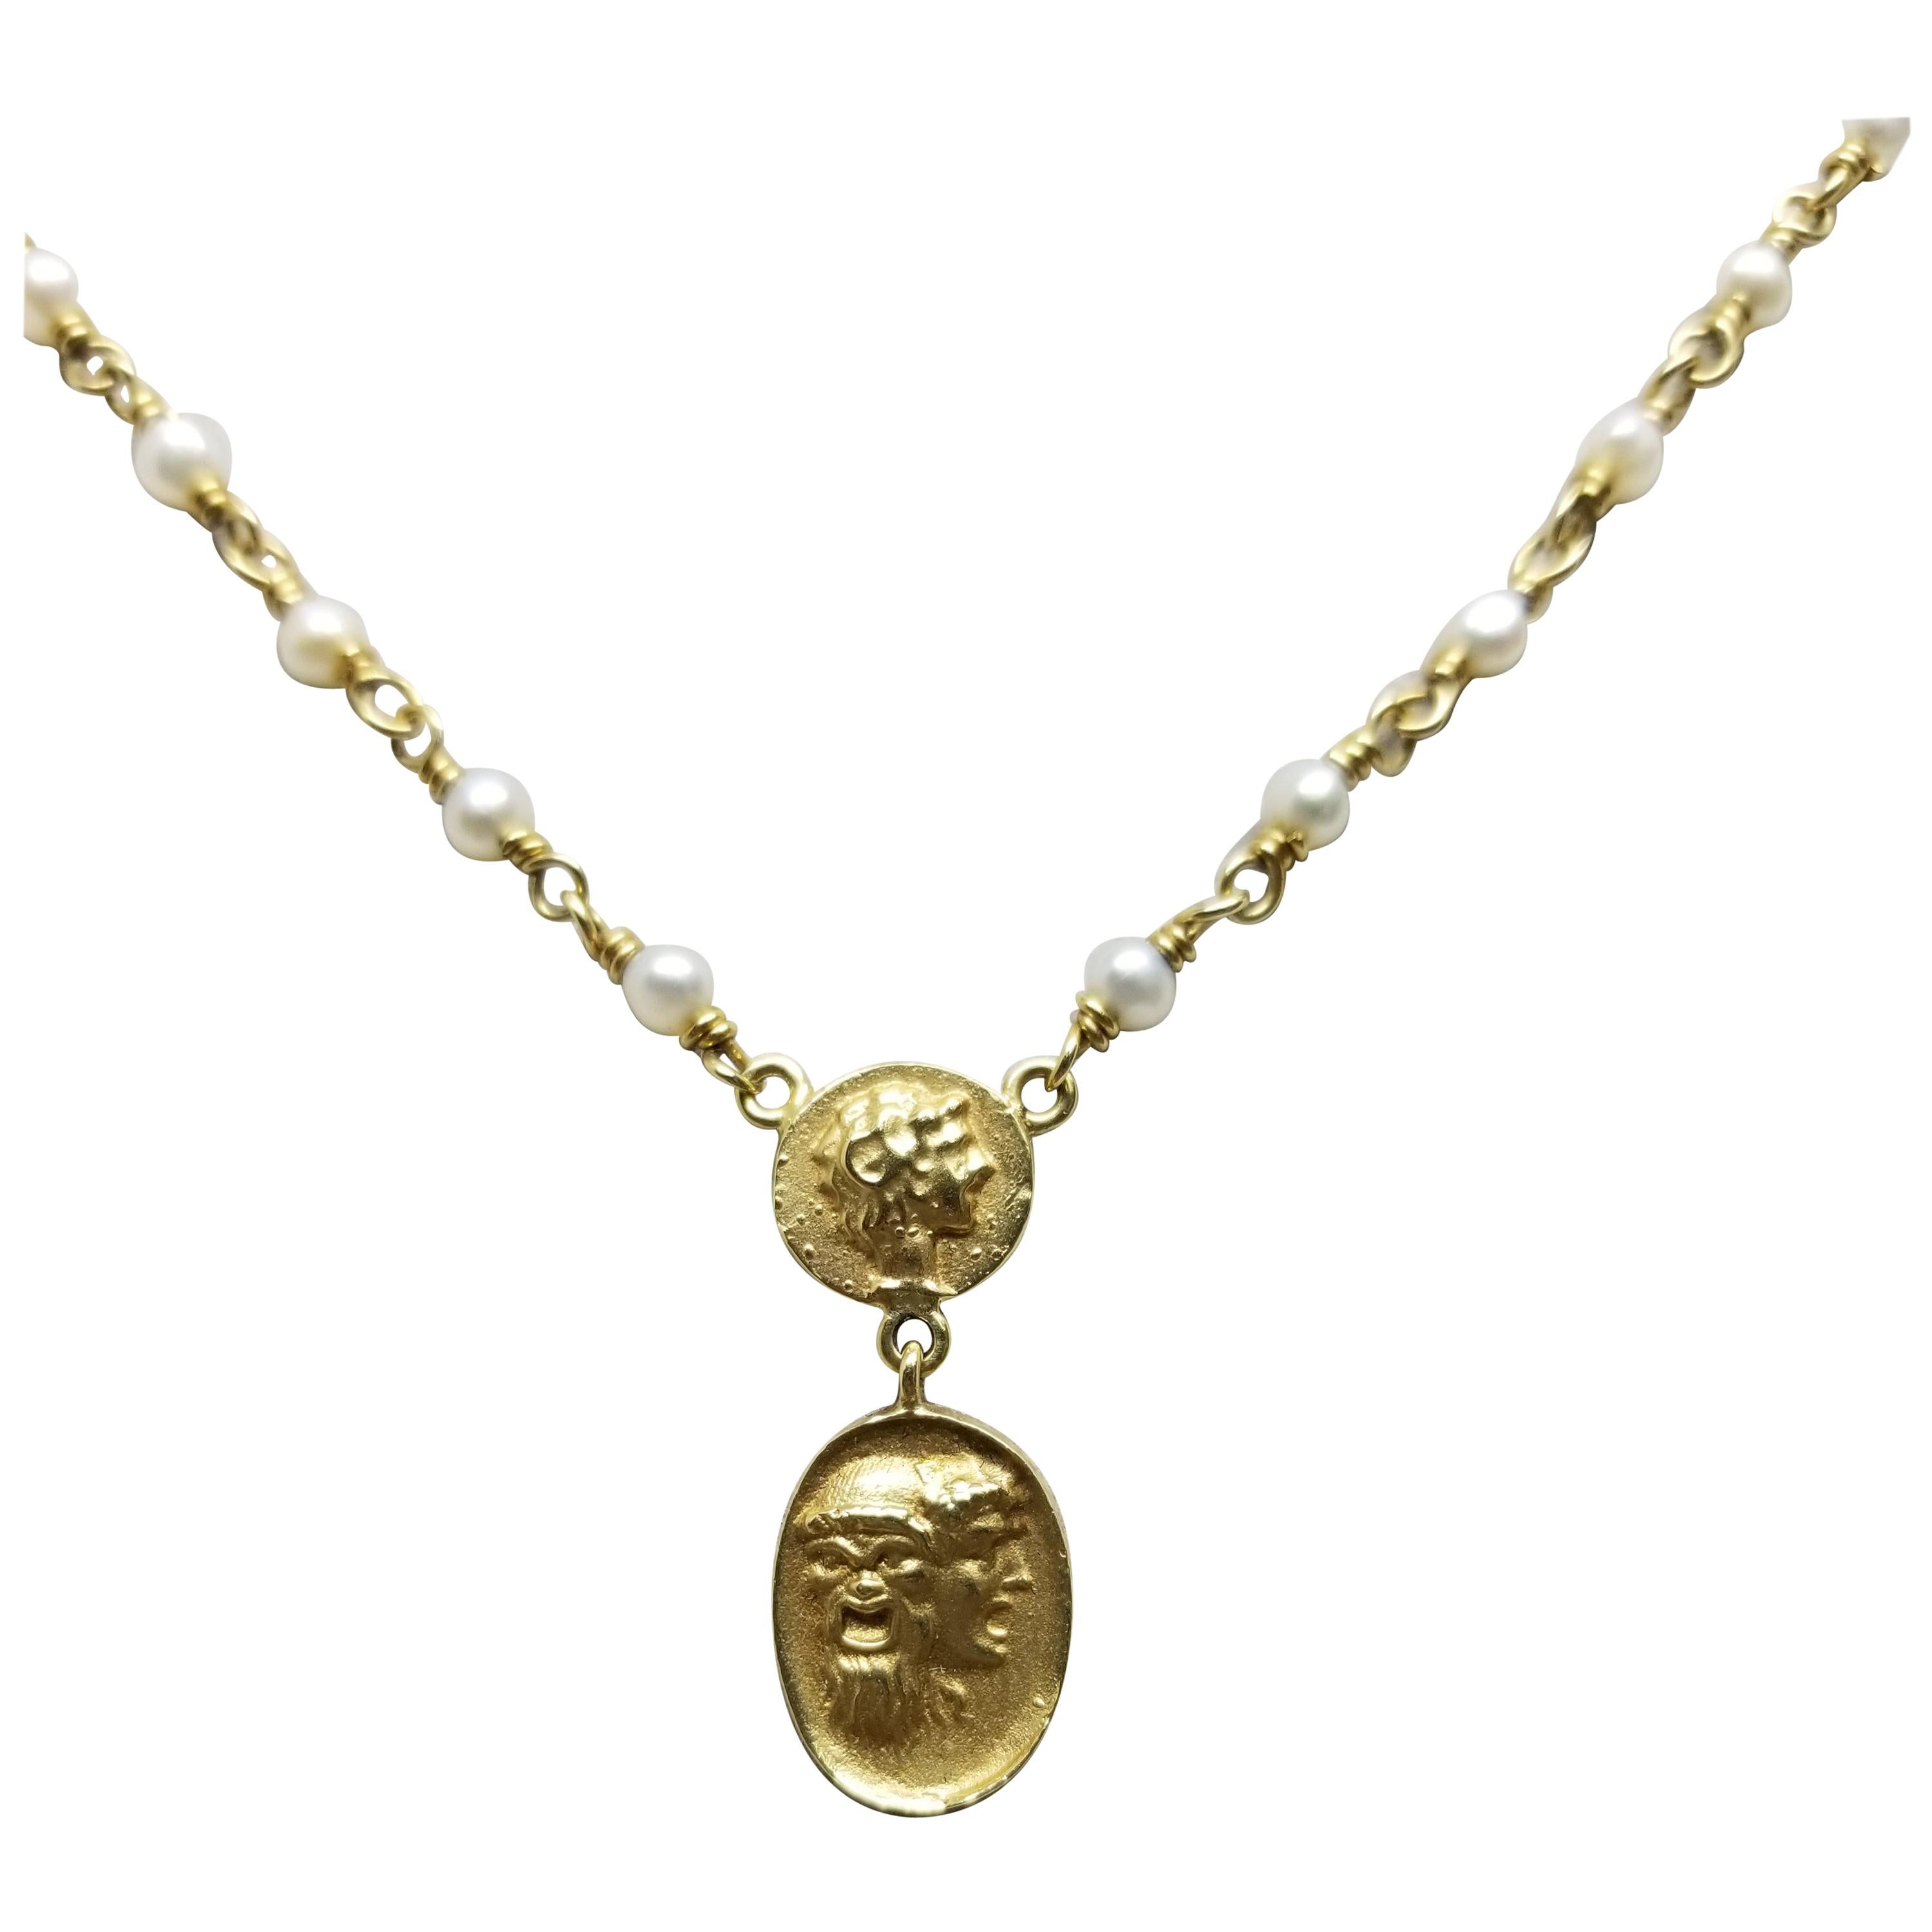 "Roman Coin" Look on 14 Karat Wire and Pearl Necklace